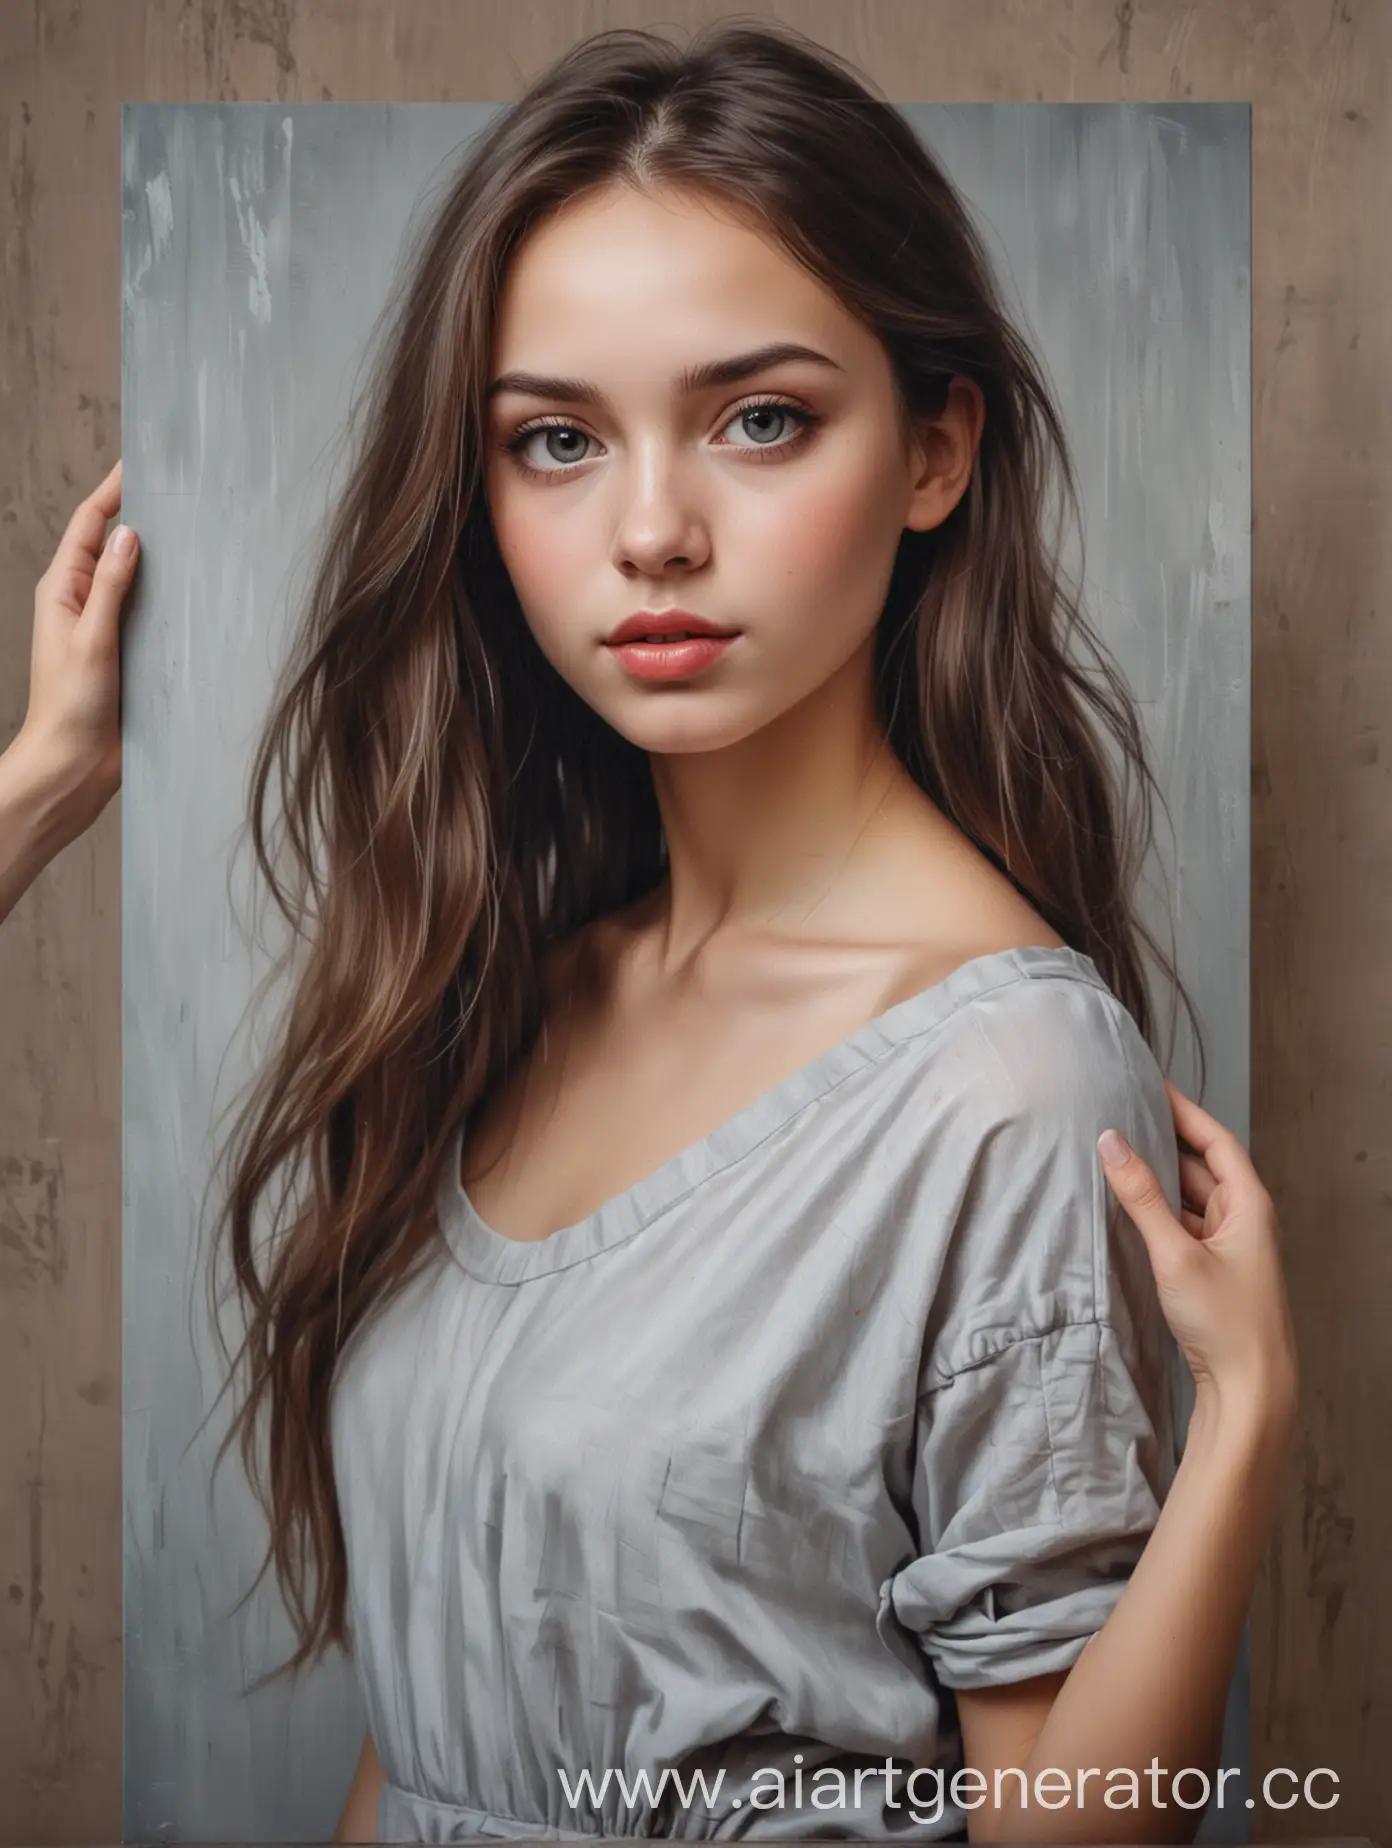 A portrait on canvas measuring 50x70 centimeters is held in the hands of a beautiful slender girl